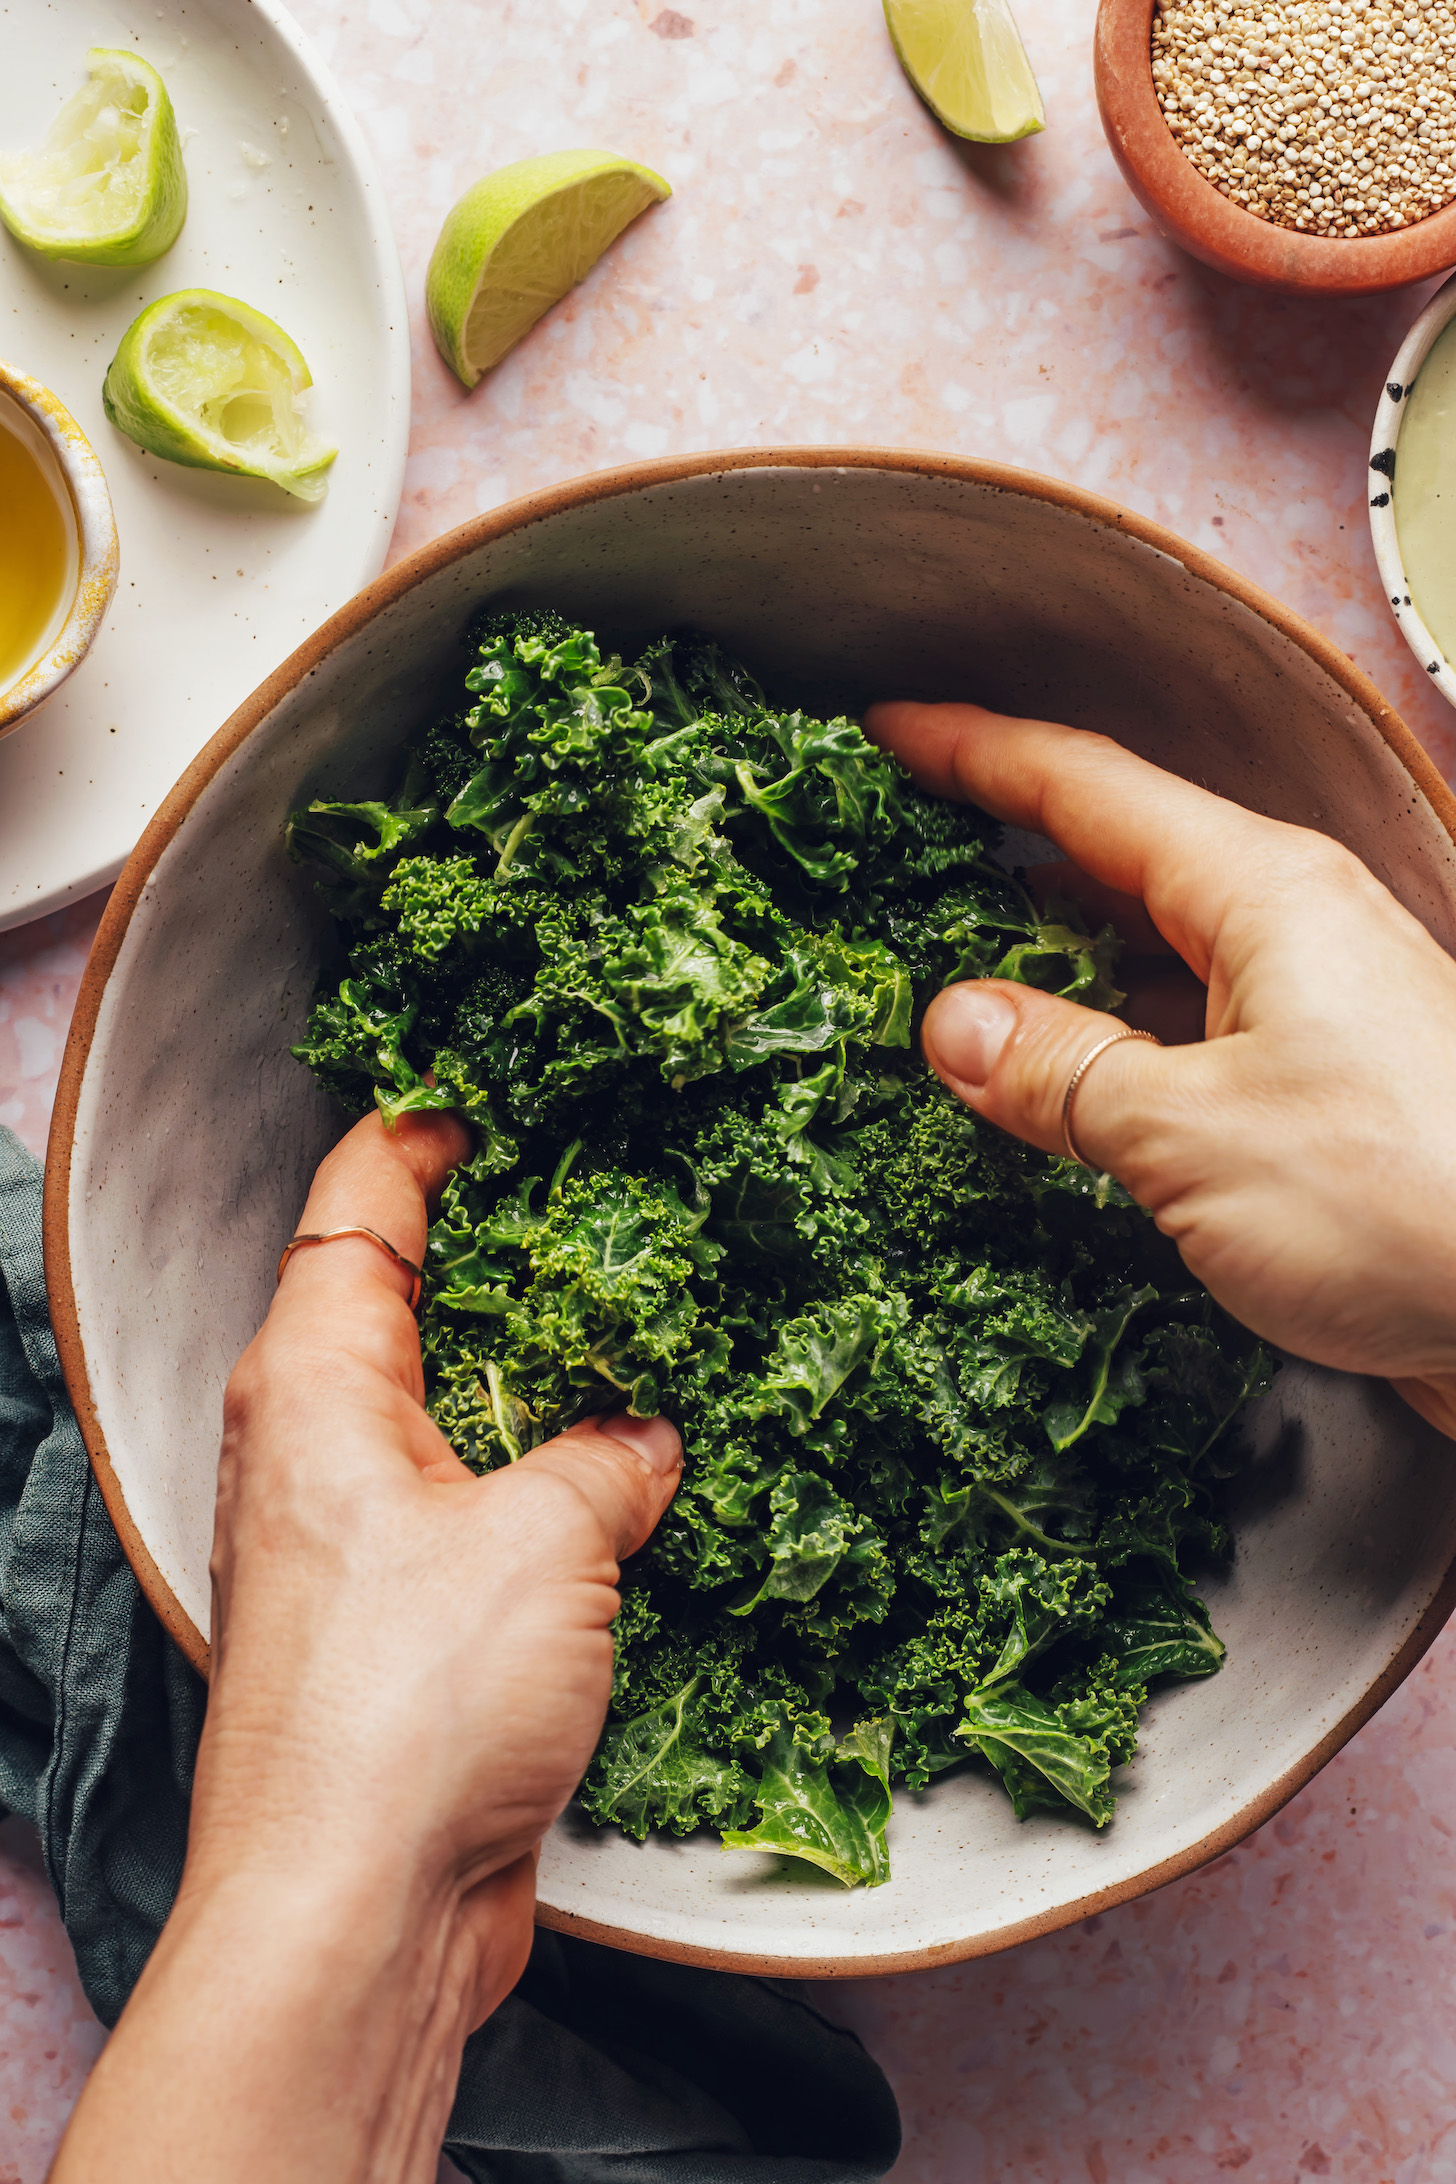 Massaging kale with lime juice, olive oil, and maple syrup